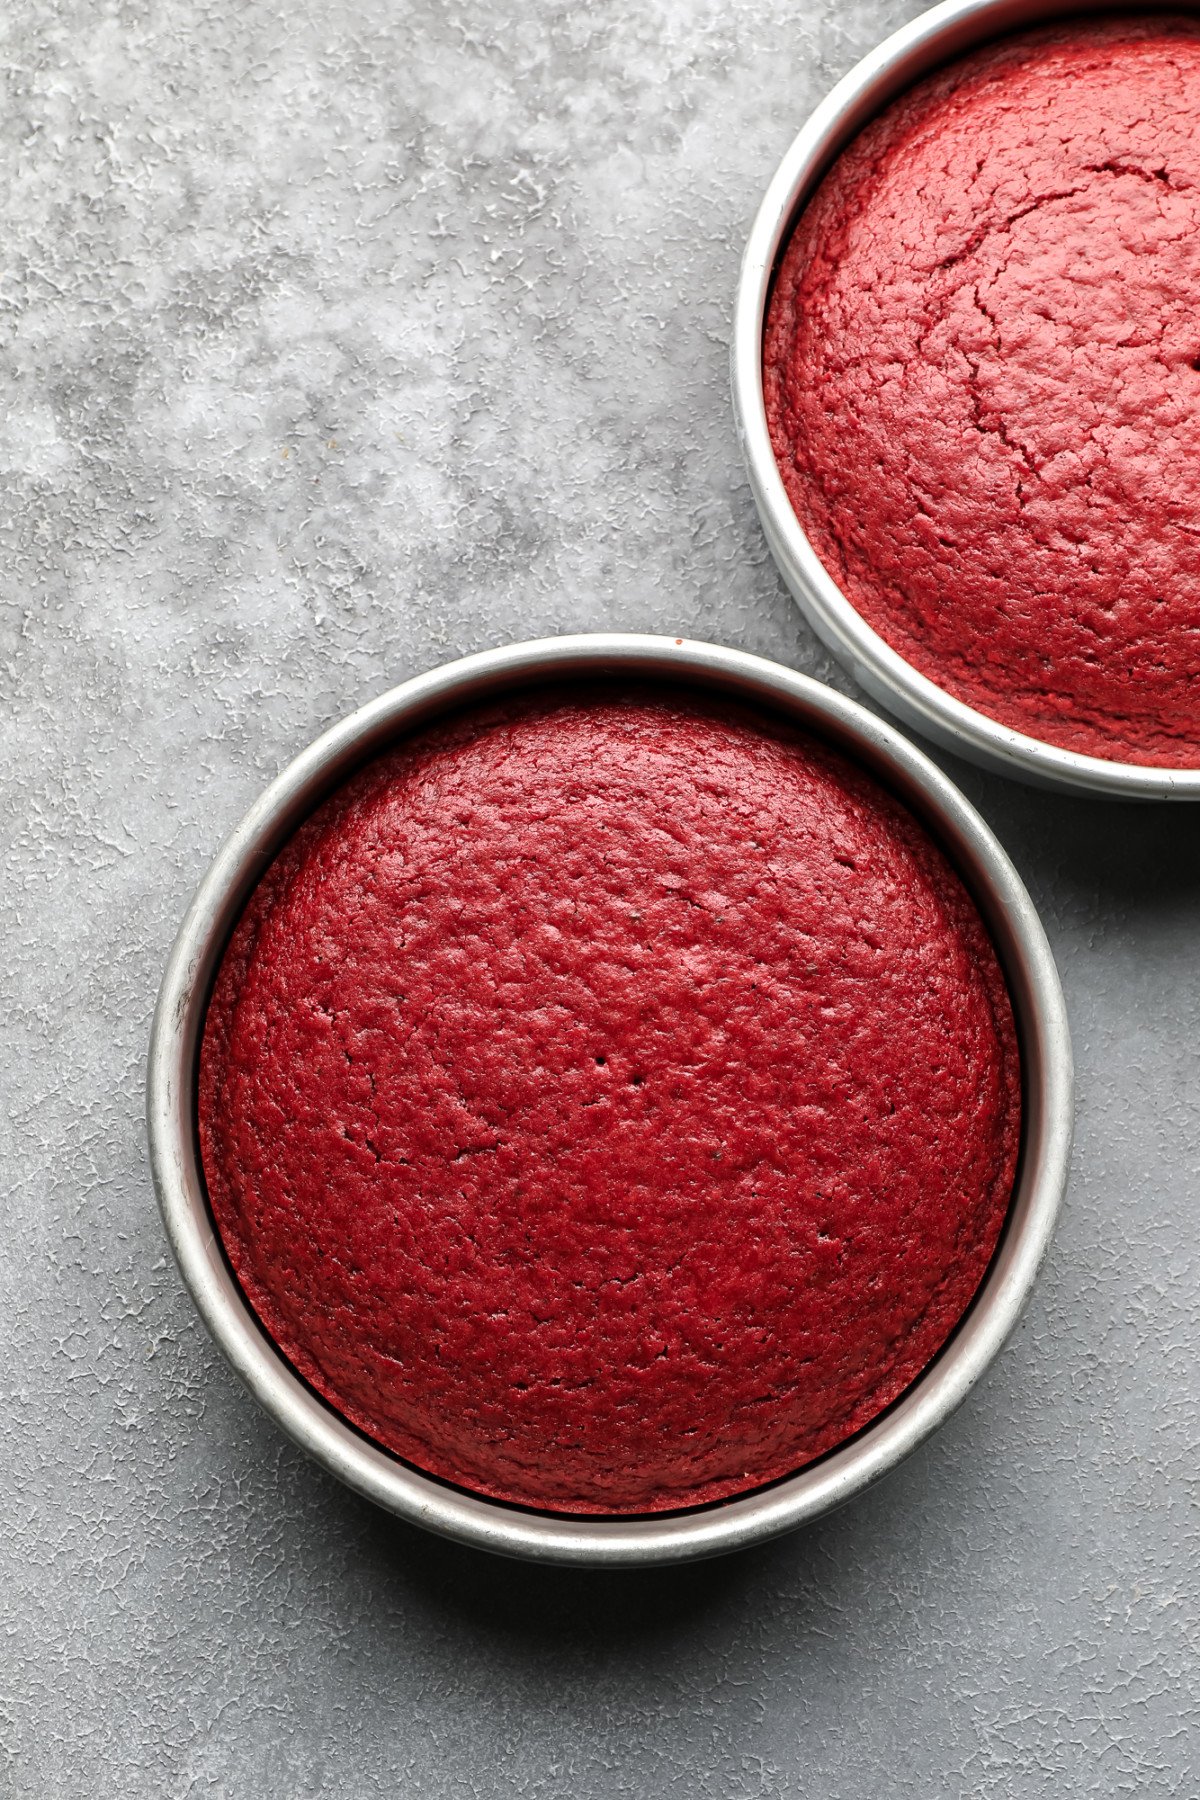 cooked vegan red velvet cakes in round pans on grey background